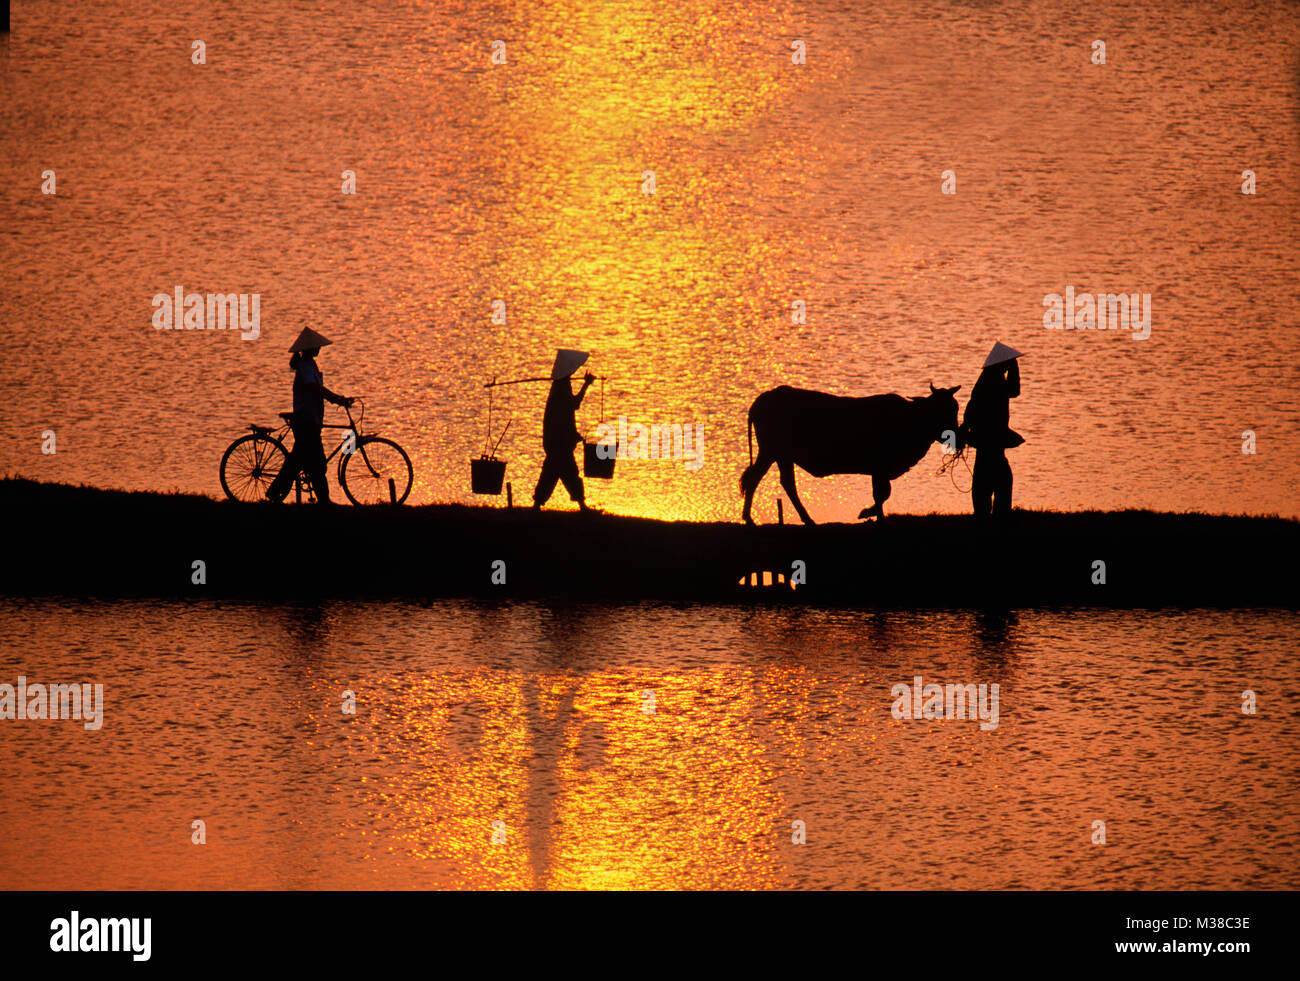 Vietnam. Near Hanoi. Woman working in agriculture. Going home at sunset. Ox, cow. Bicycle. Water buckets. reflection of sun. Stock Photo